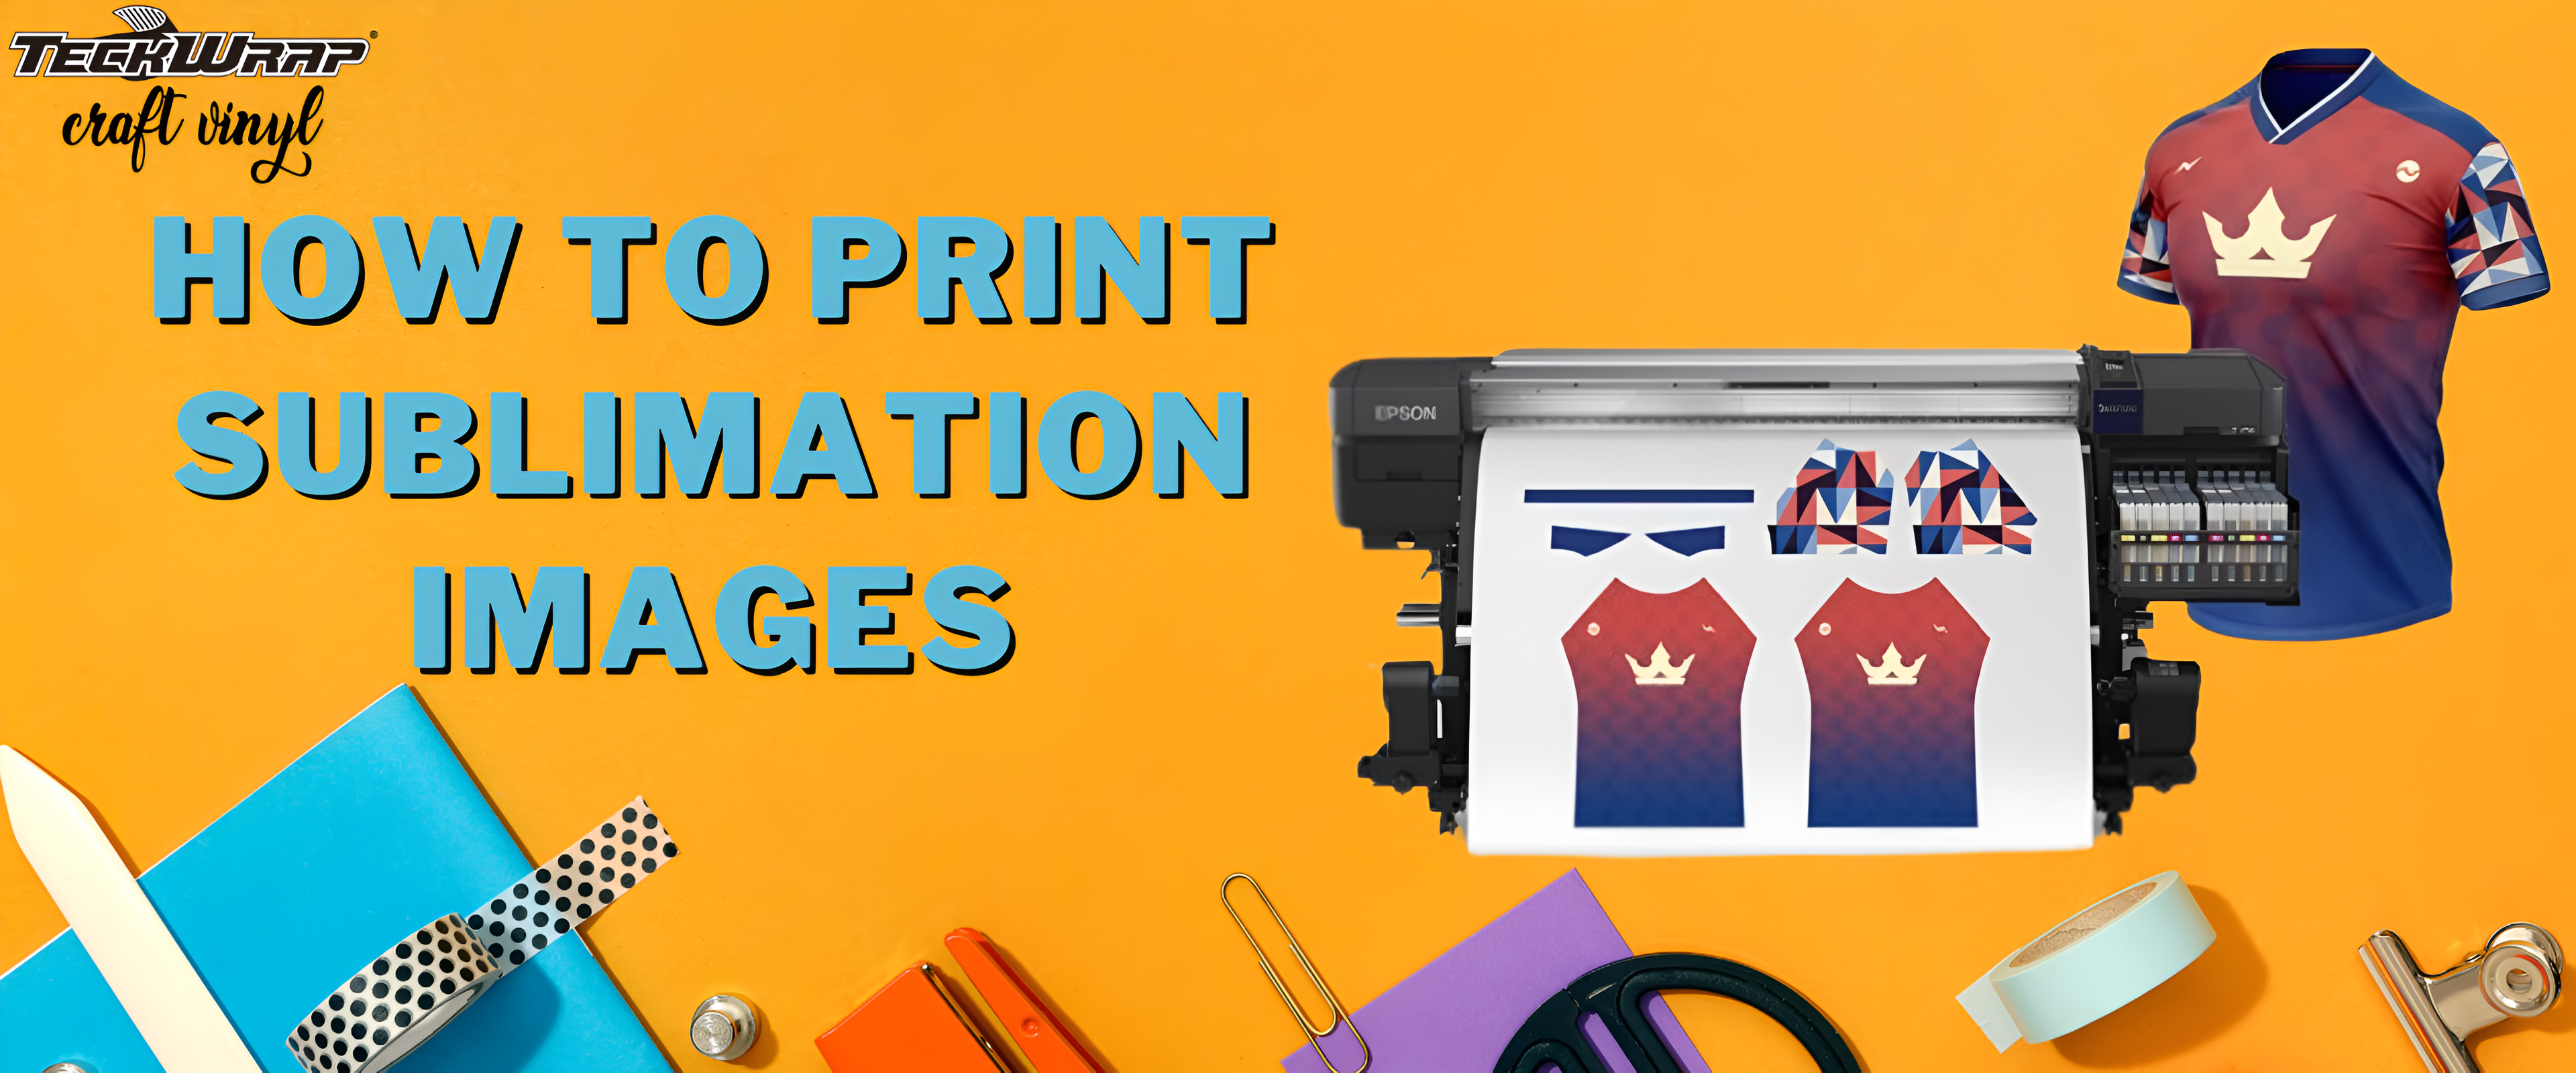 Sublimation Blanks Clearance Archives - Leading Supplier of Dye  Sublimation, Heat Presses & Vinyl Cutters